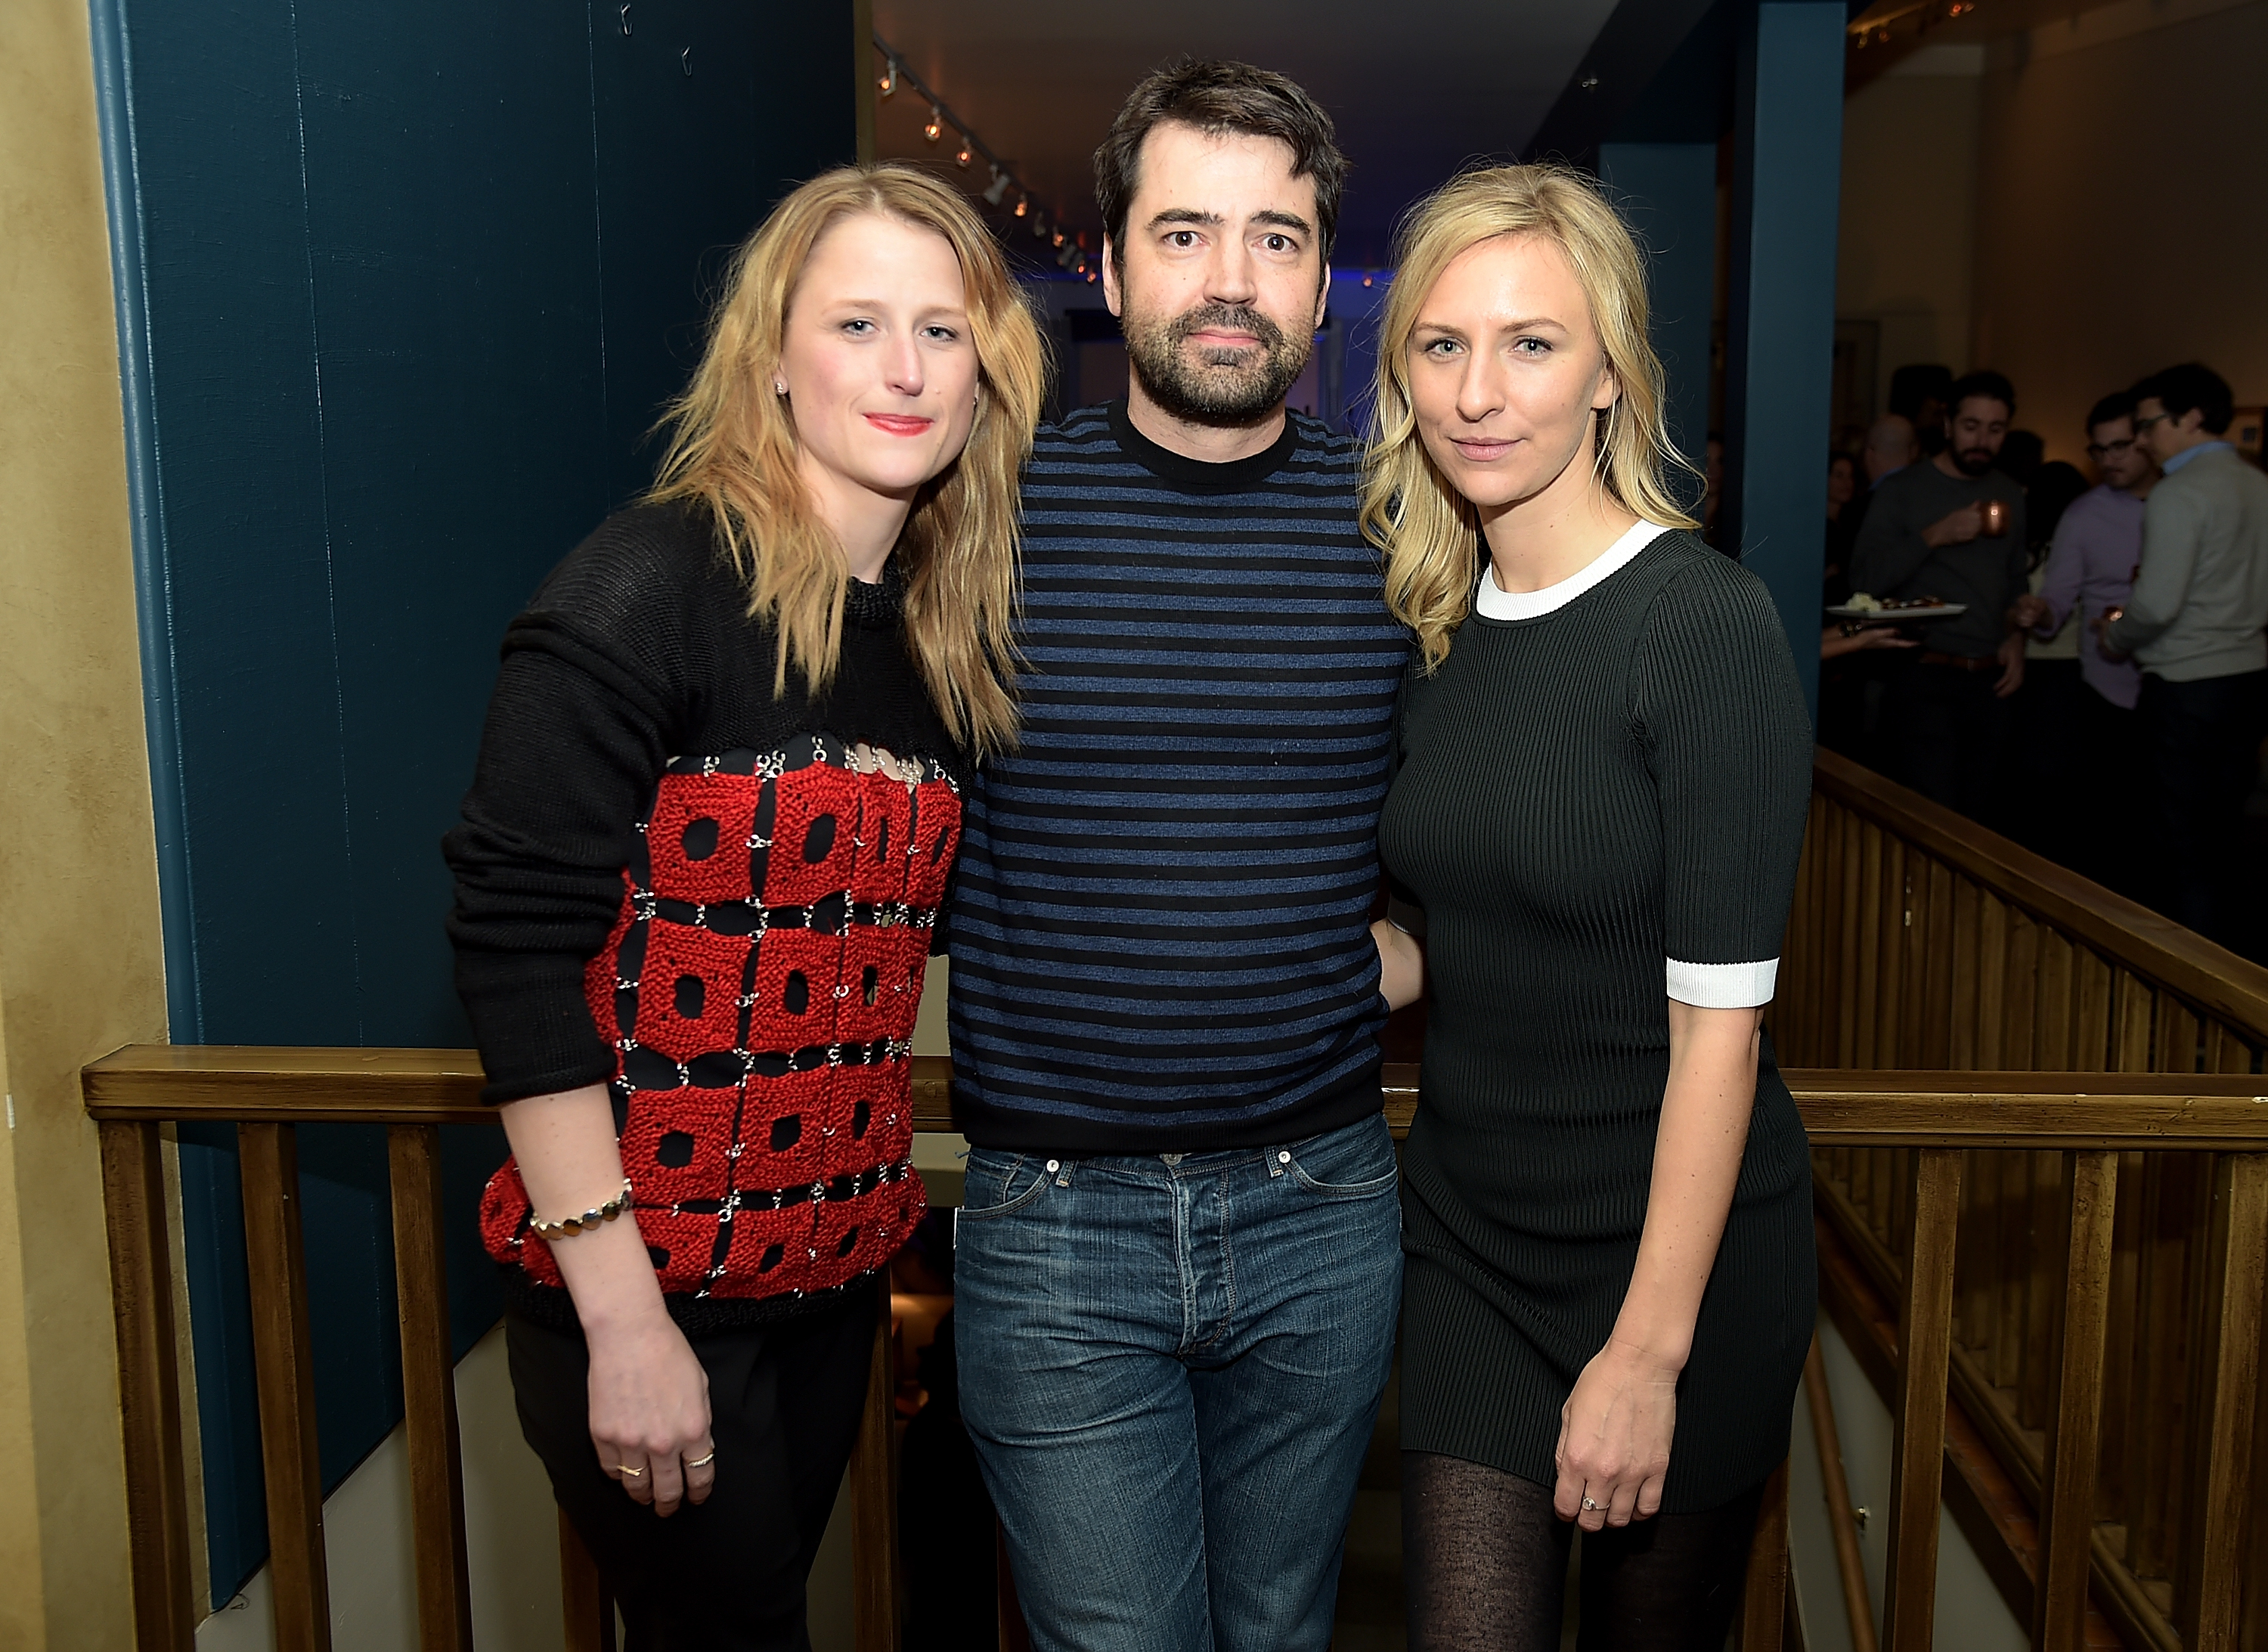 Mamie Gummer, Ron Livingston and Mickey Sumner attend GREY GOOSE Blue Door Hosts "The End of Tour" Party 